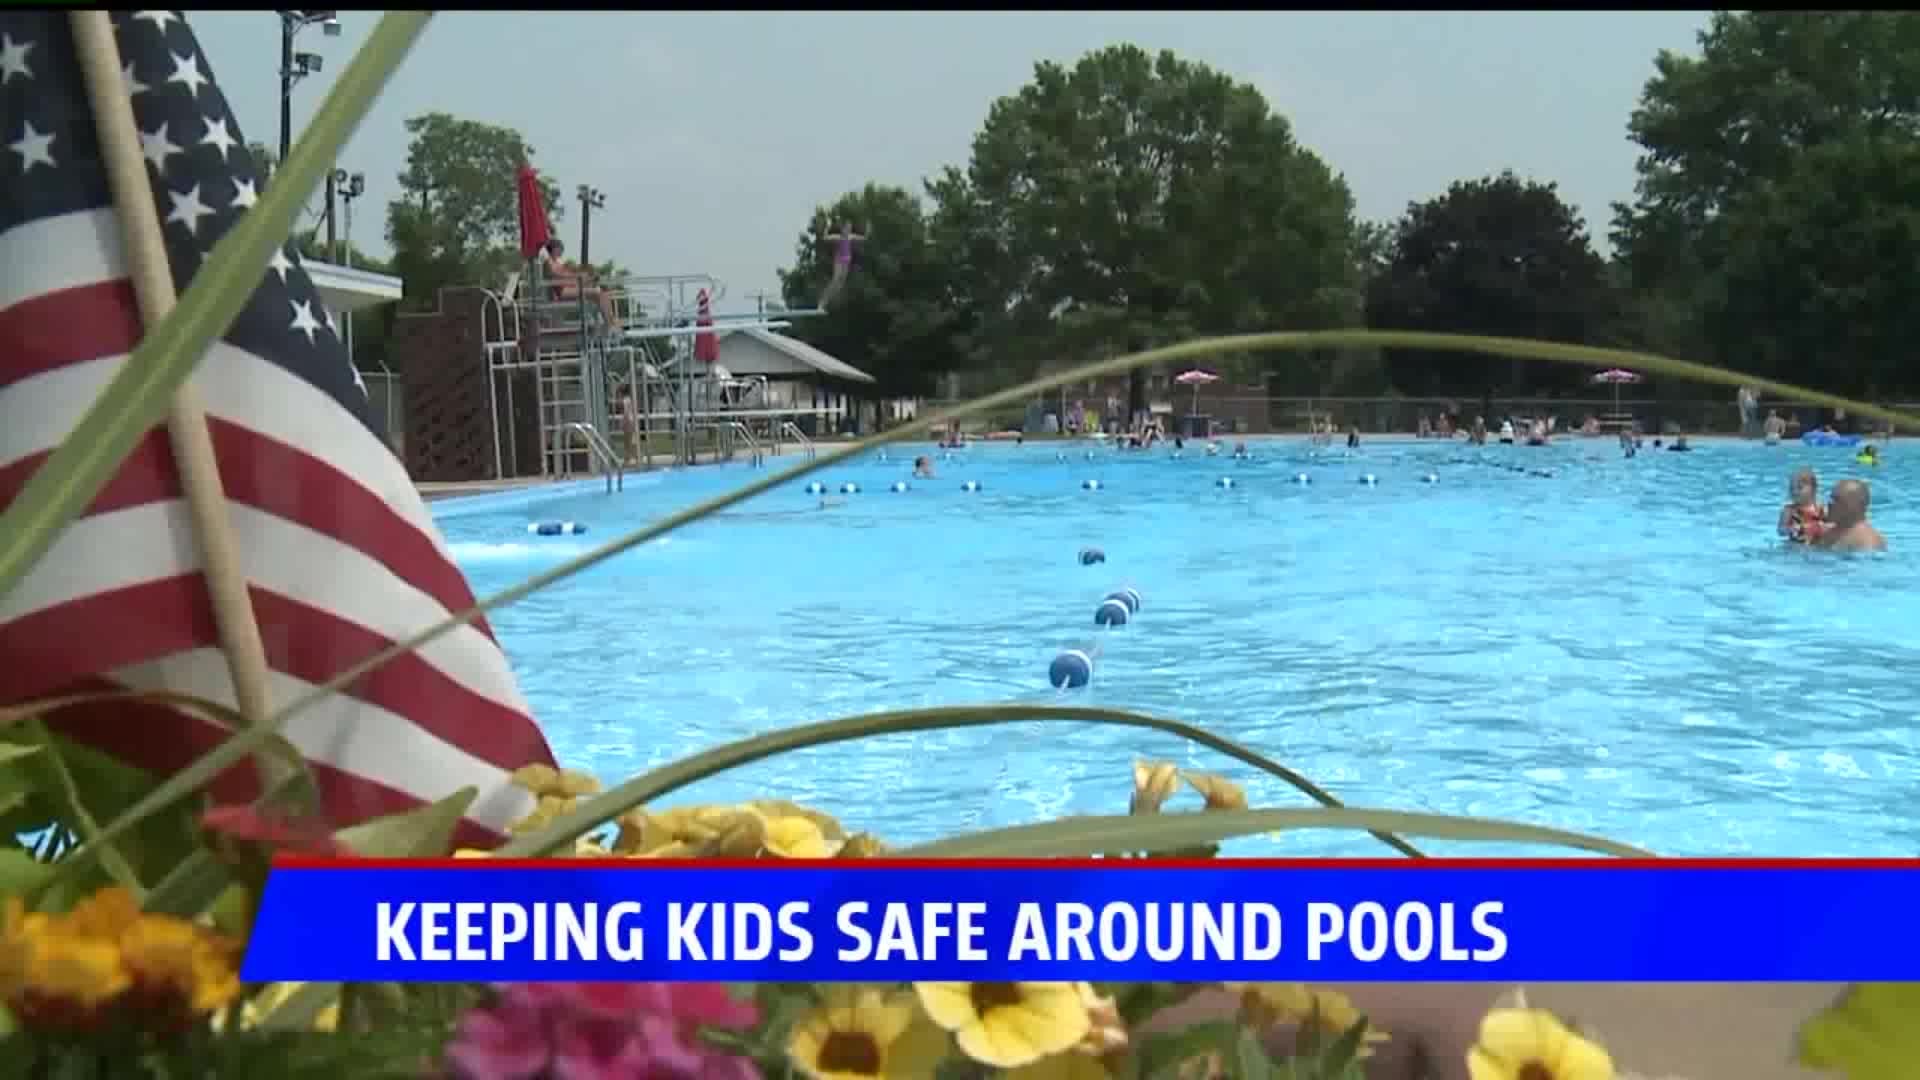 Health experts warn of drowning prevention as the heat kicks in